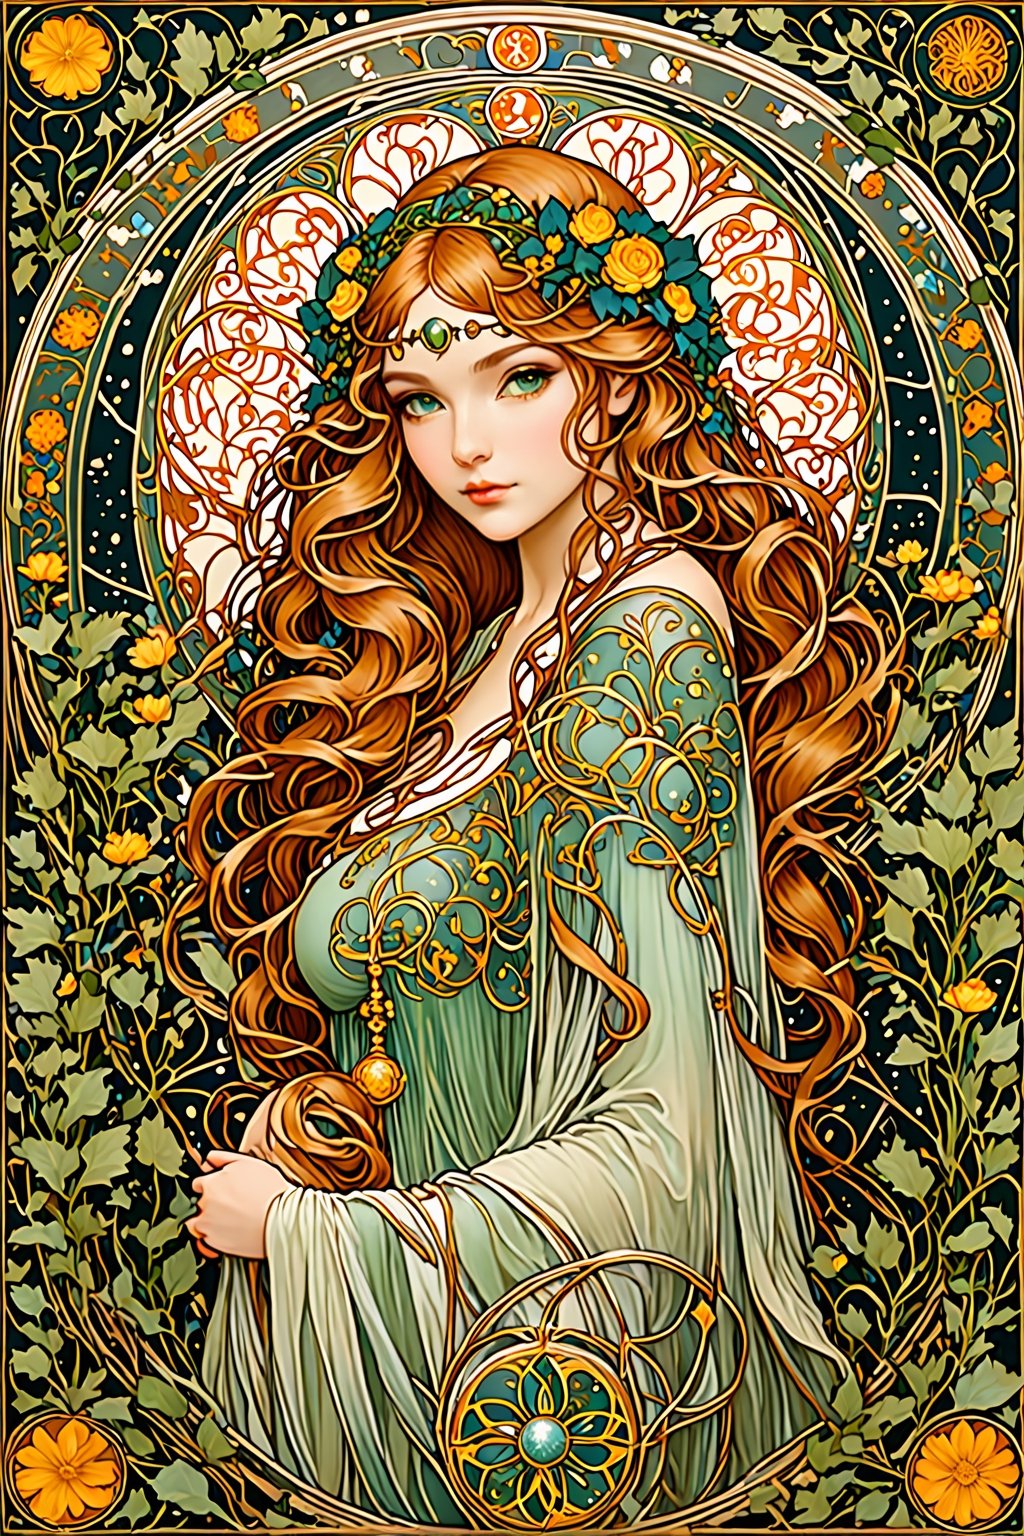 Create a captivating scene inspired by Mucha's 'Zodiac', featuring a grand wheel adorned with lush greenery and flowers, depicting the twelve zodiac signs in intricate detail. Symbolizing the passage of a year, the wheel is accompanied by a large disc and a crescent moon, representing day and night. While the focus is on the zodiac, the central figure, a woman dressed in opulent attire adorned with exquisite headpieces and dazzling jewelry, steals the spotlight with her alluring gaze and flowing locks, showcasing the hallmark of Art Nouveau style. Create unusual shapes in the style of Gustav Klimt and Alphonse Mucha,